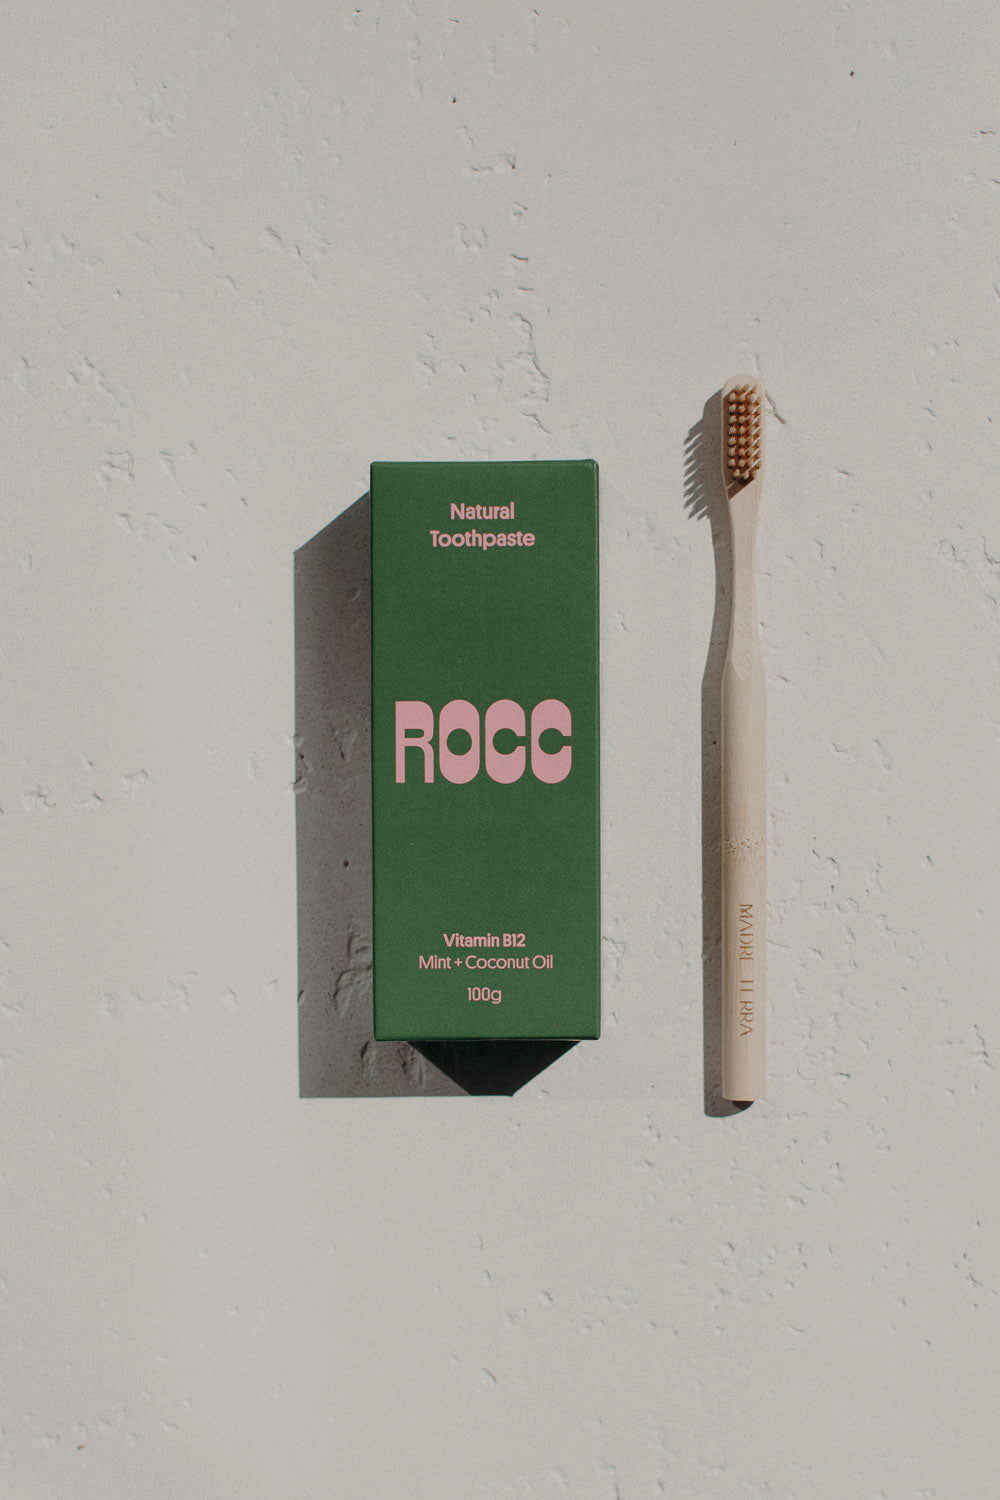 Madre Terra Toothbrush (Beige) and ROCC Toothpaste Set (Vitamin B12 + Coconut Oil)